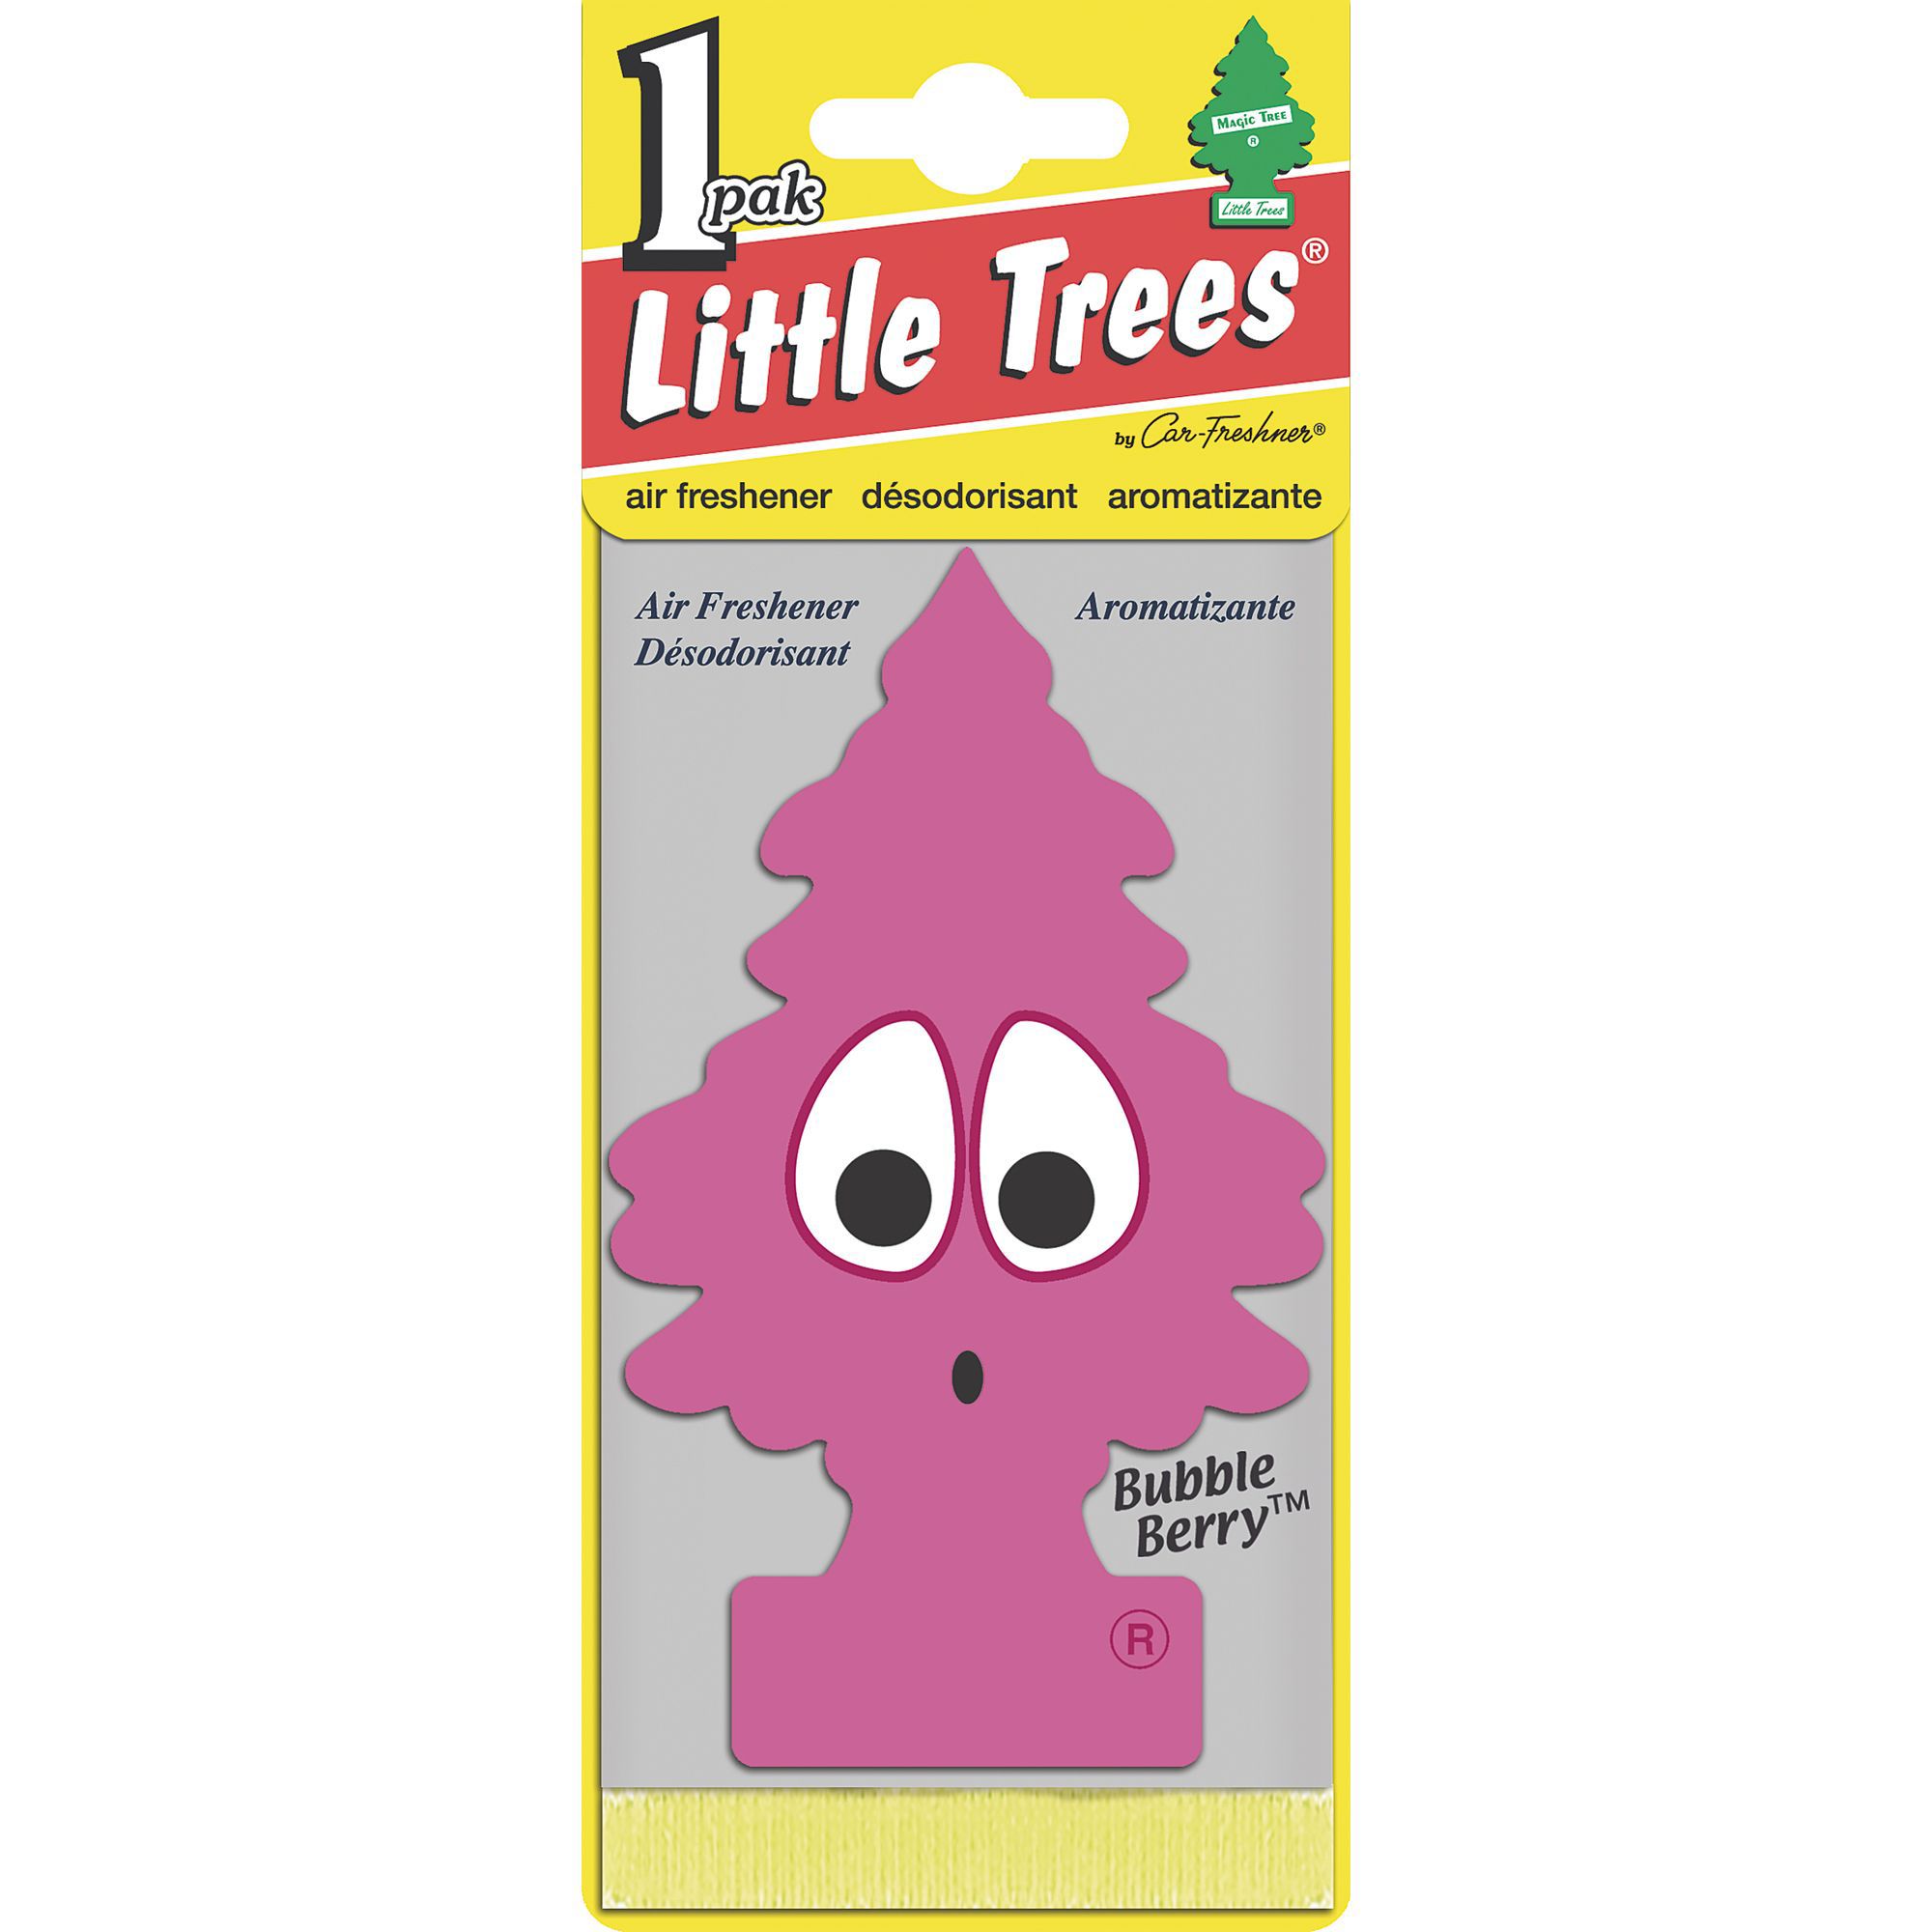 Little Trees Bubble berry Air freshener